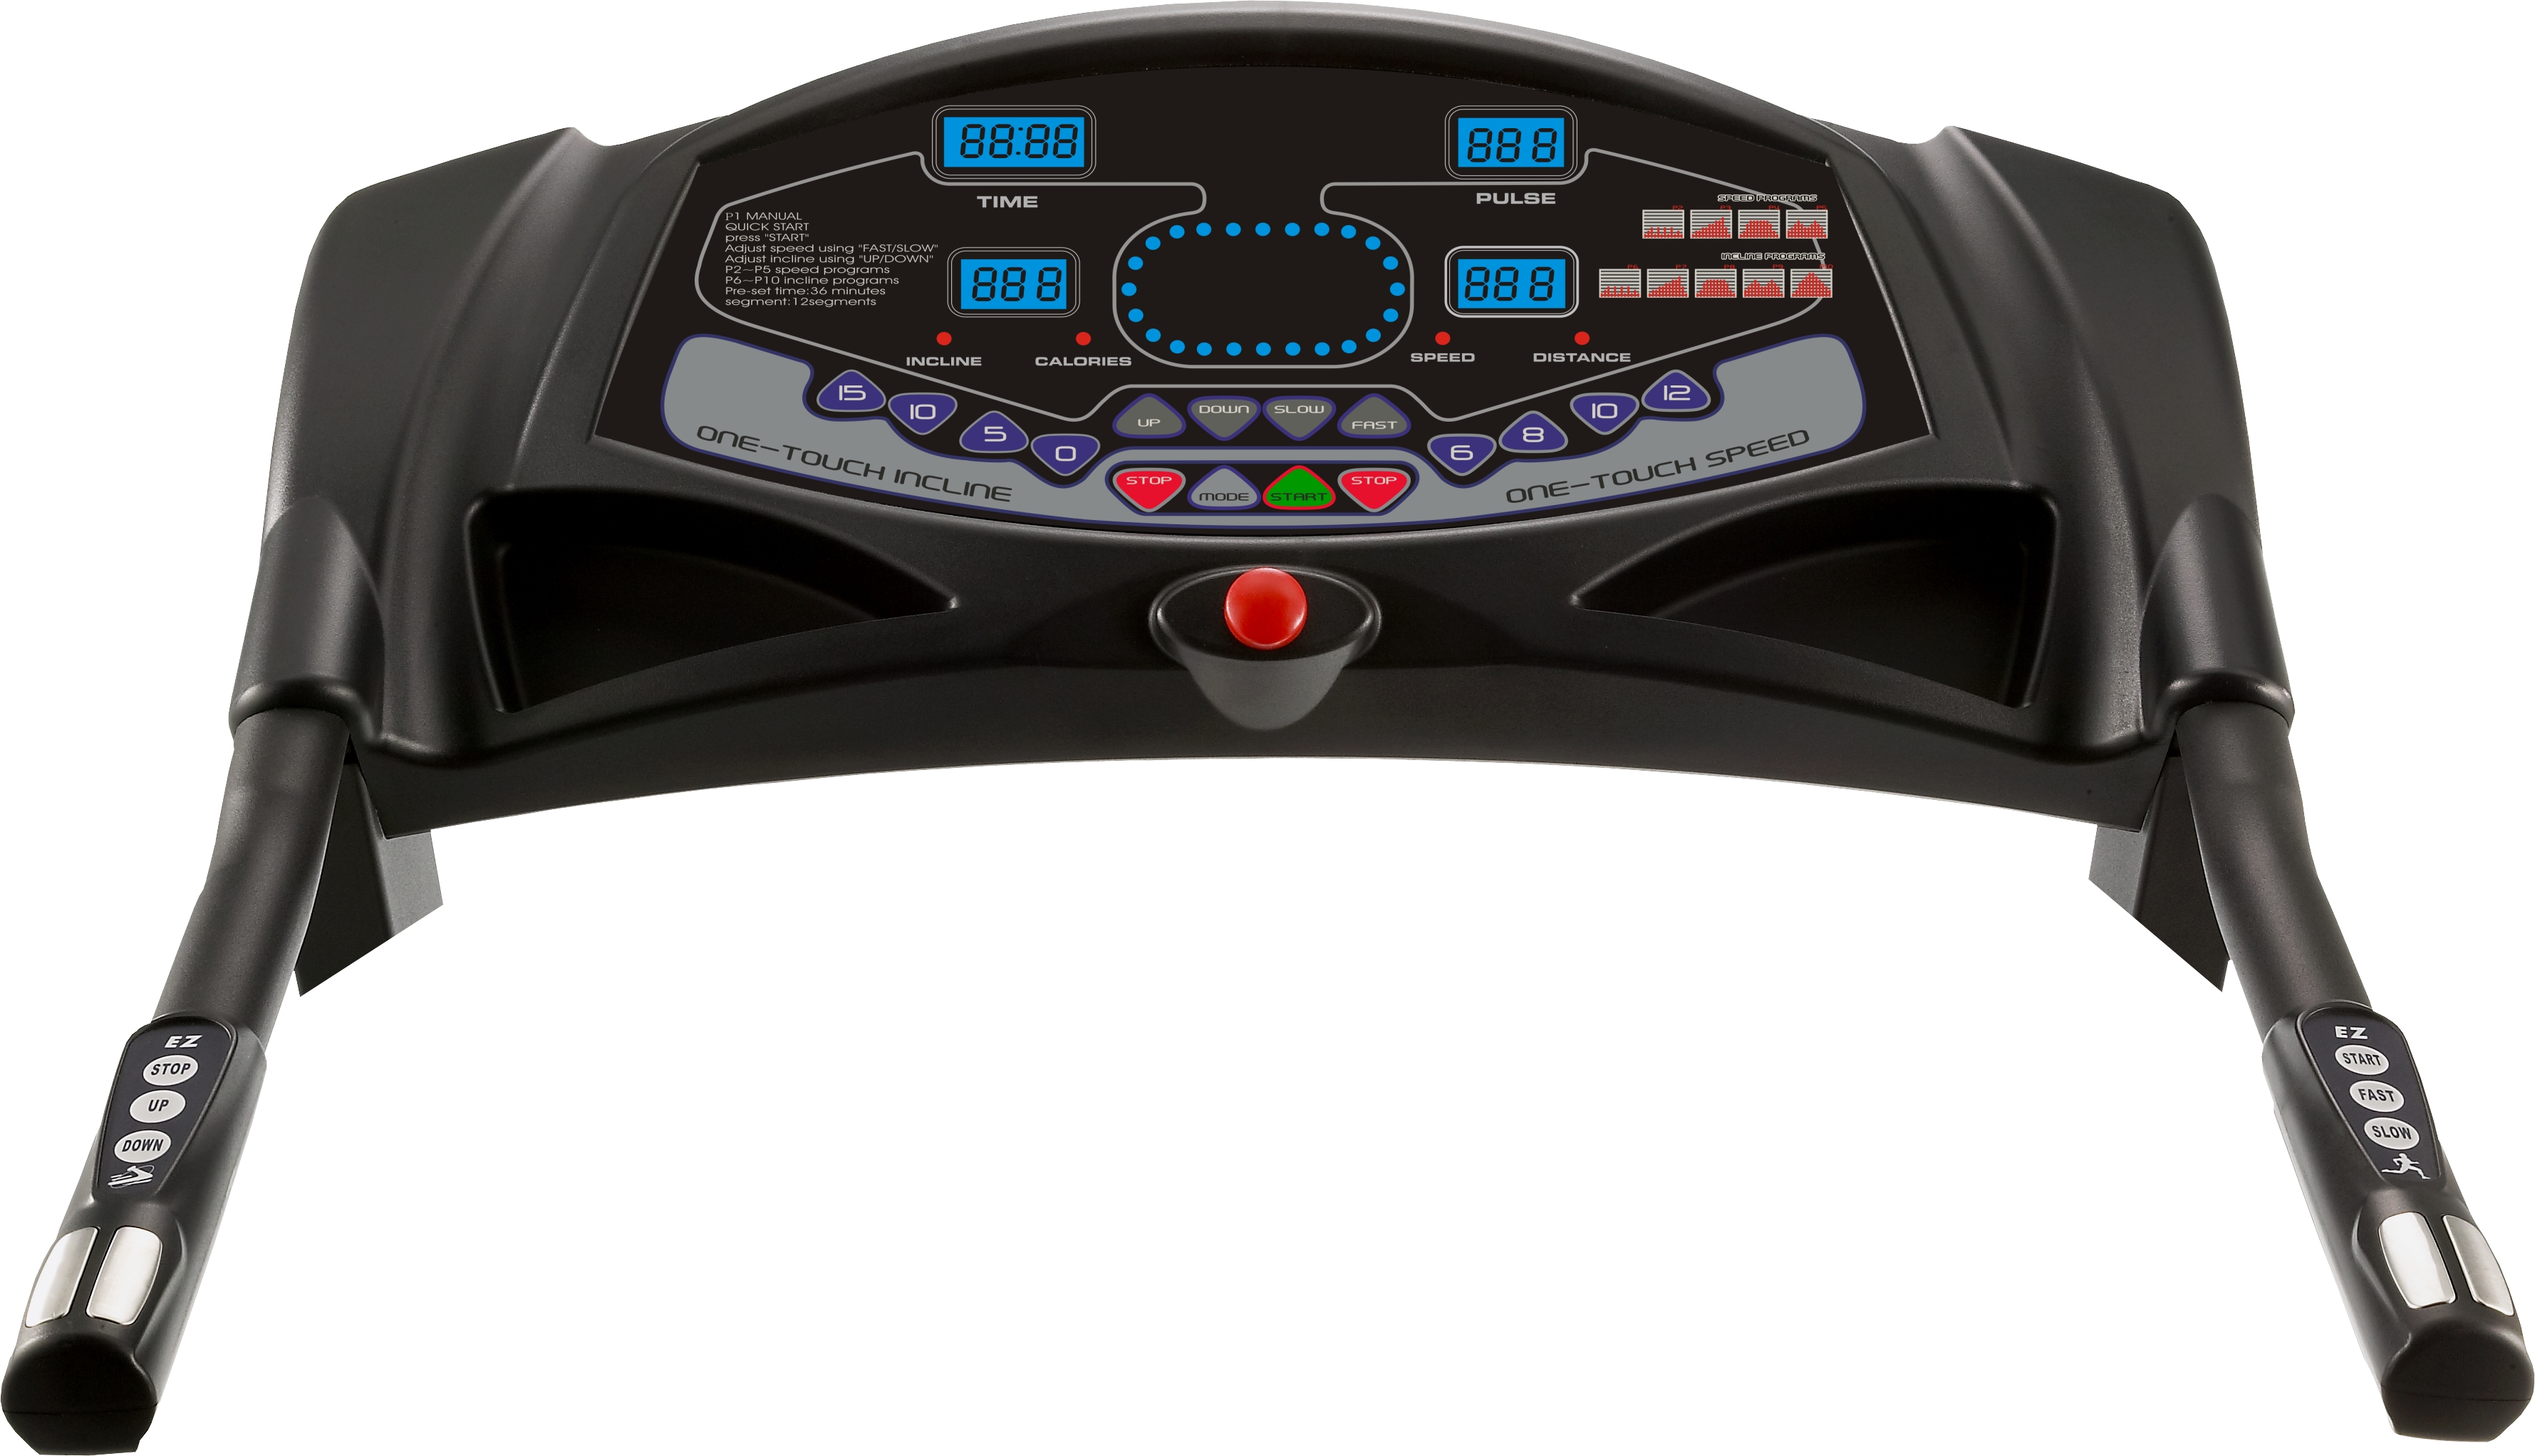 Home Use Treadmill with massage